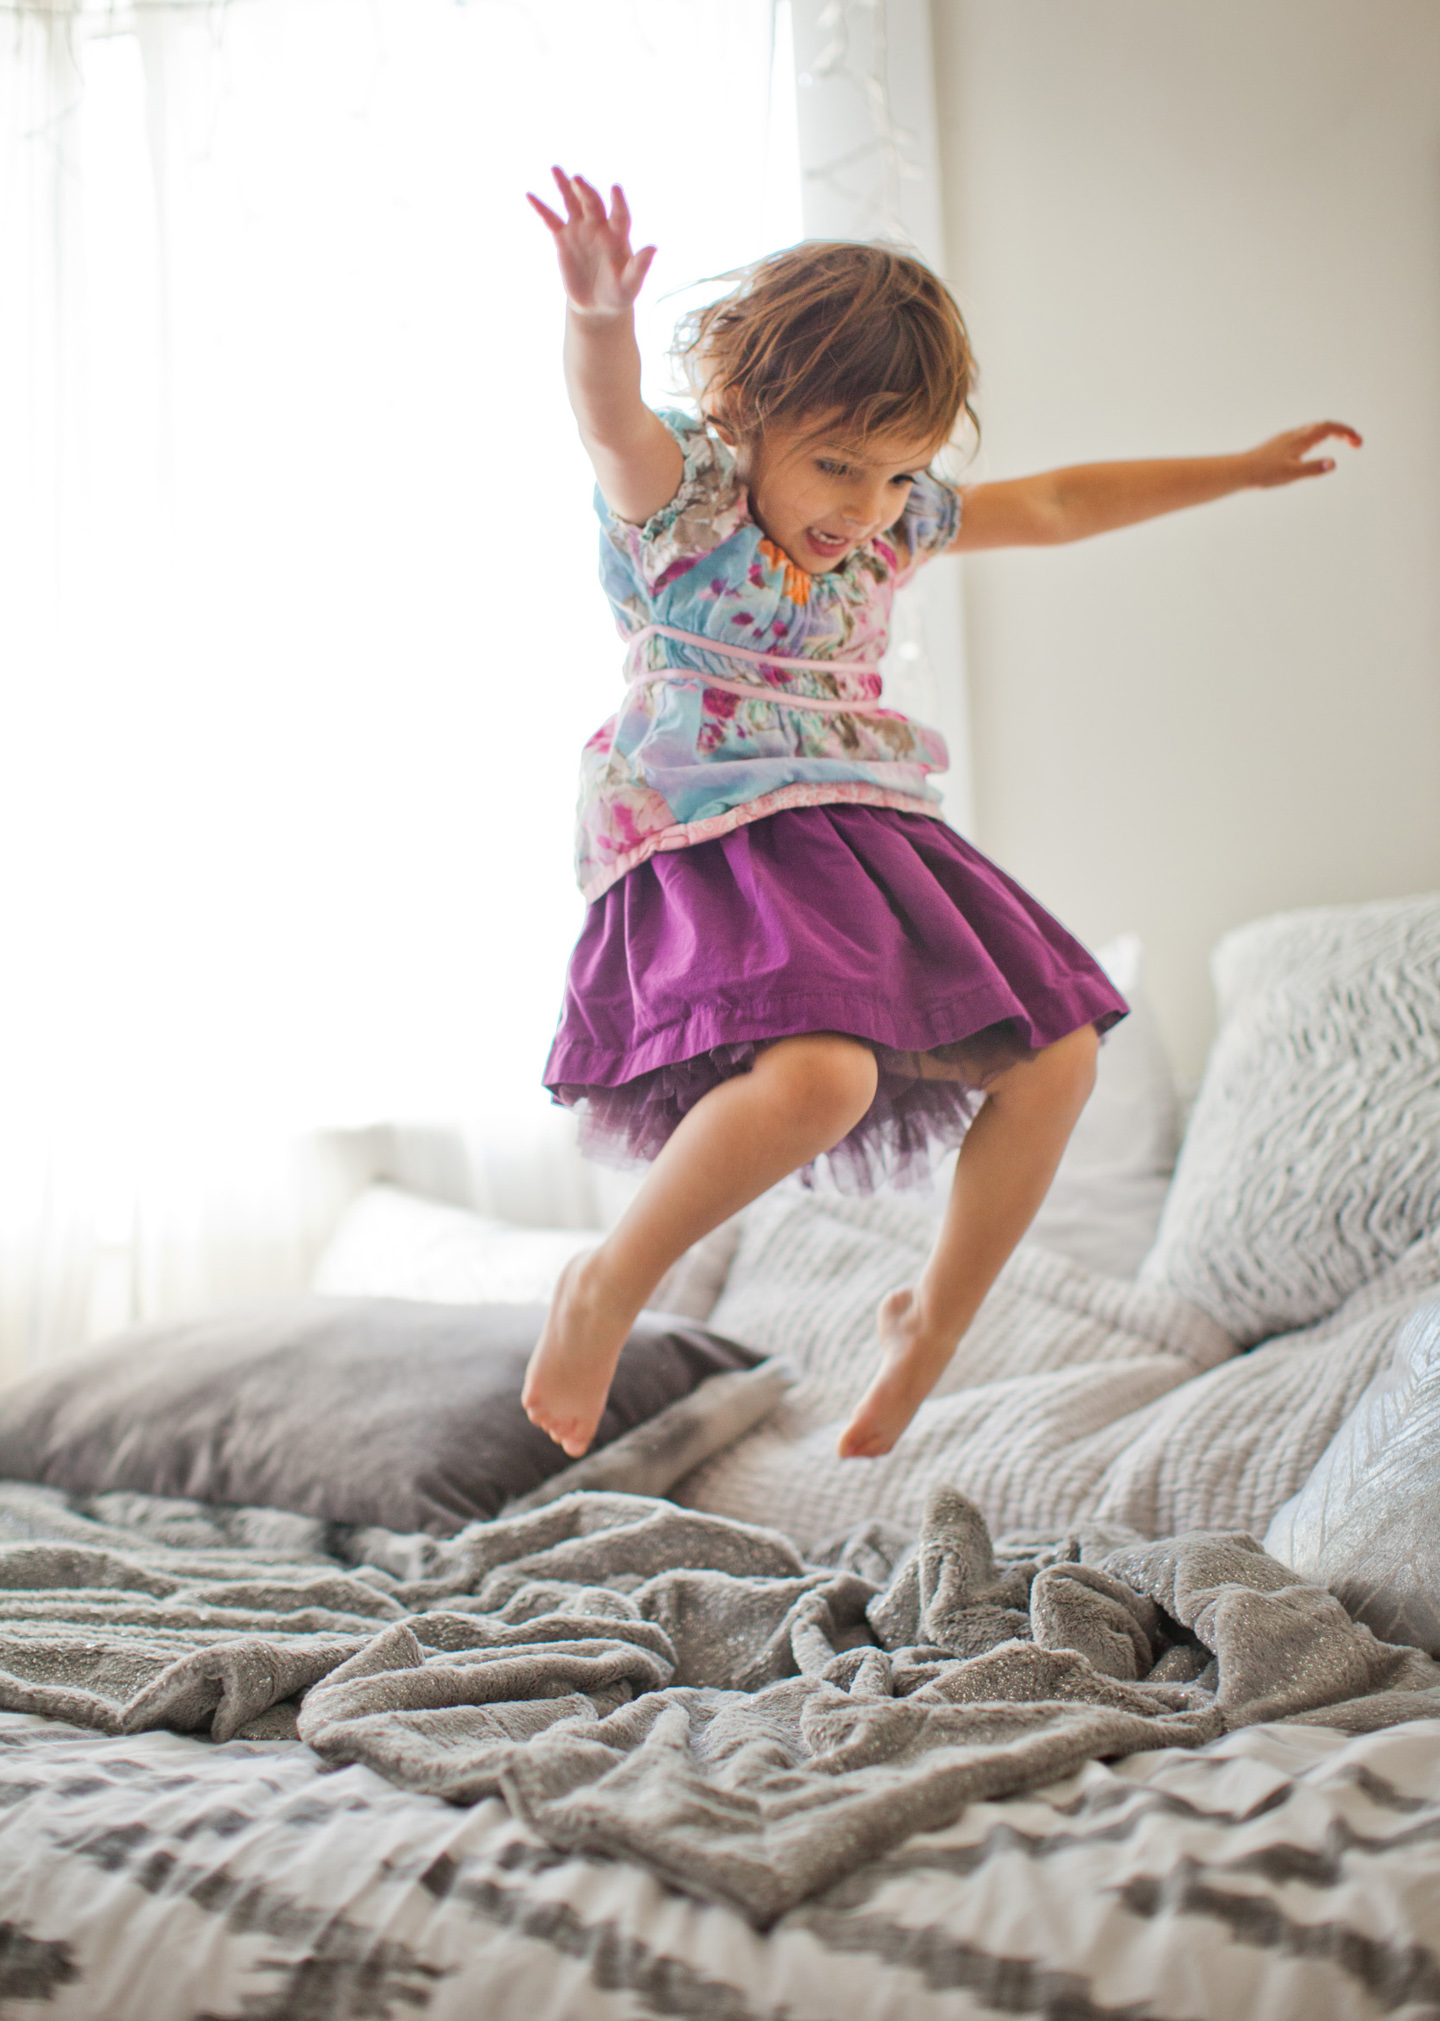 A 5-year-old girl in a purple tutu jumps on a bed